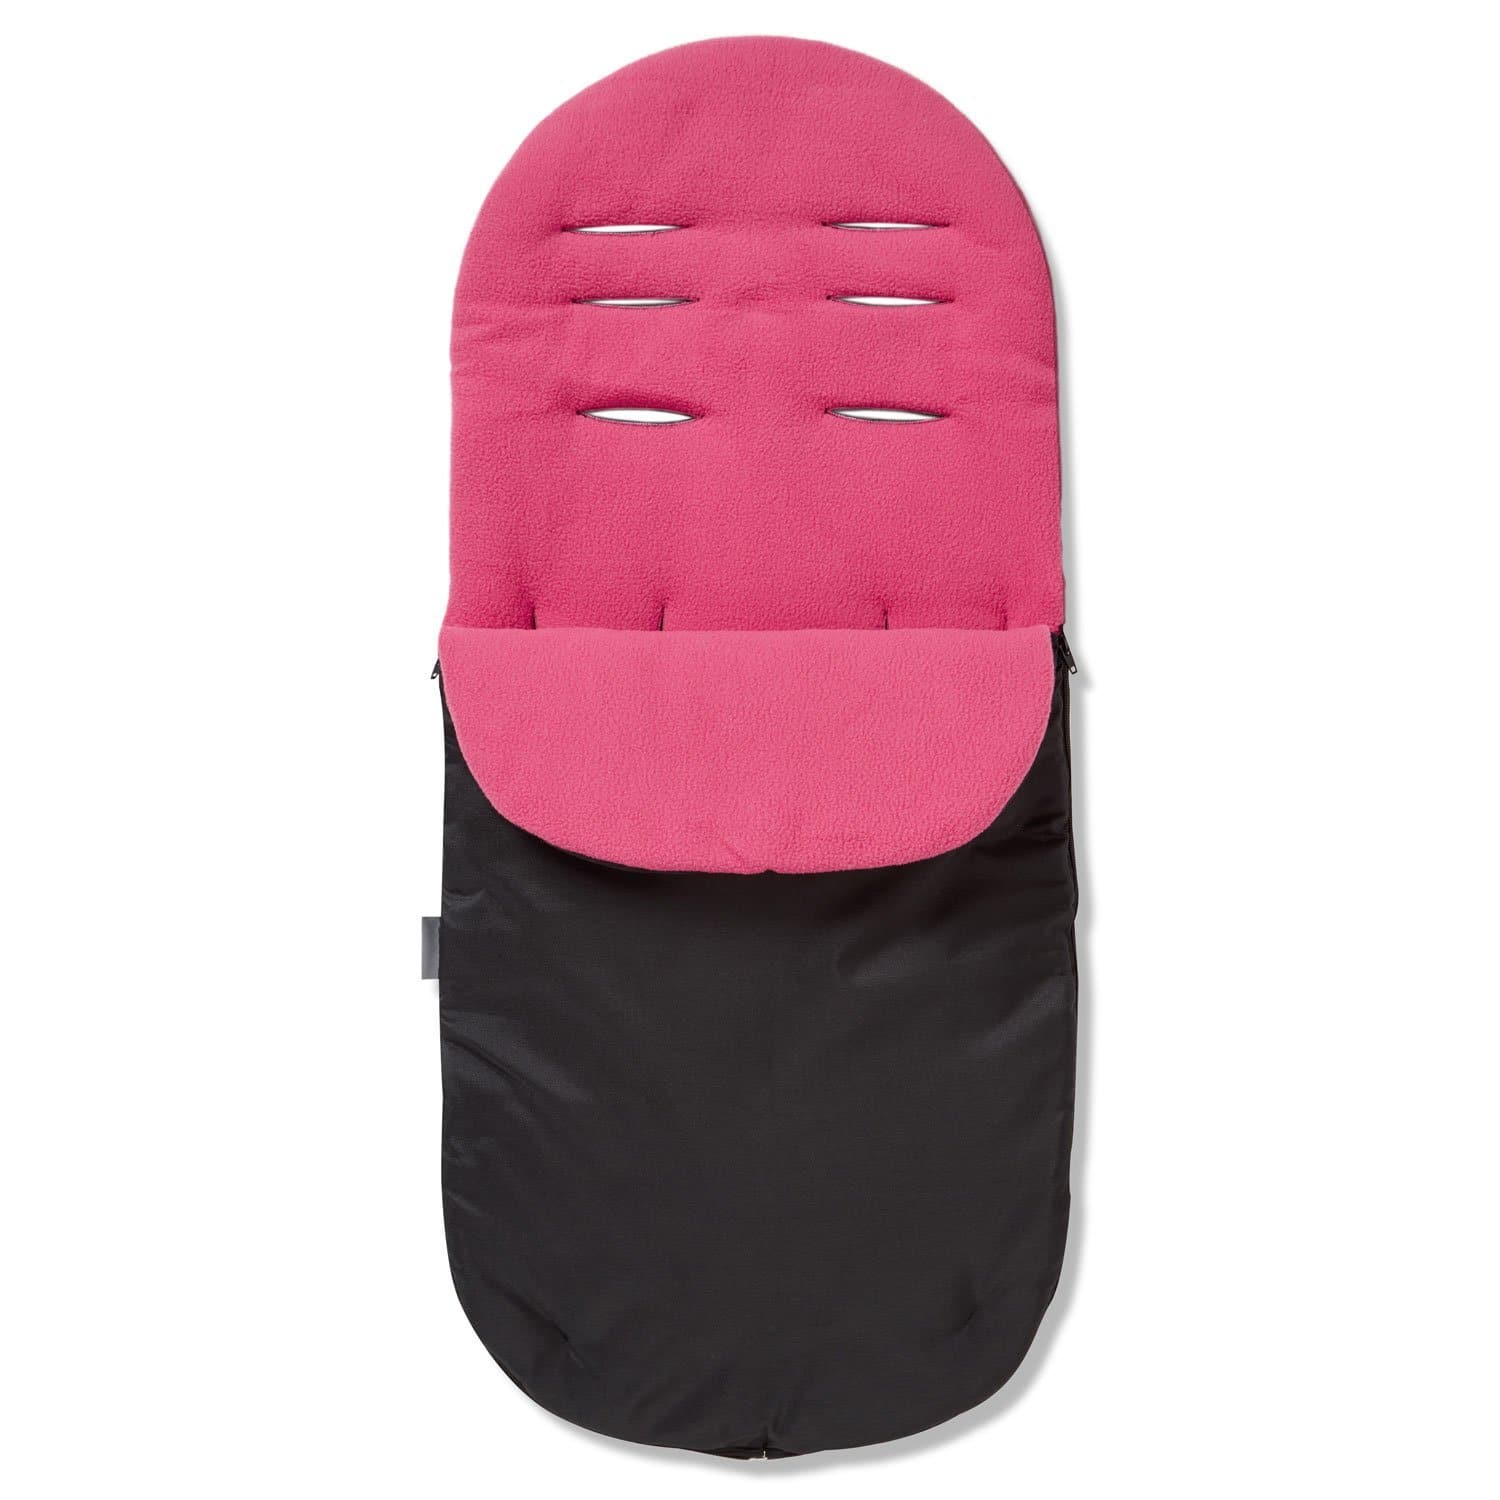 Footmuff / Cosy Toes Compatible with Joie - For Your Little One